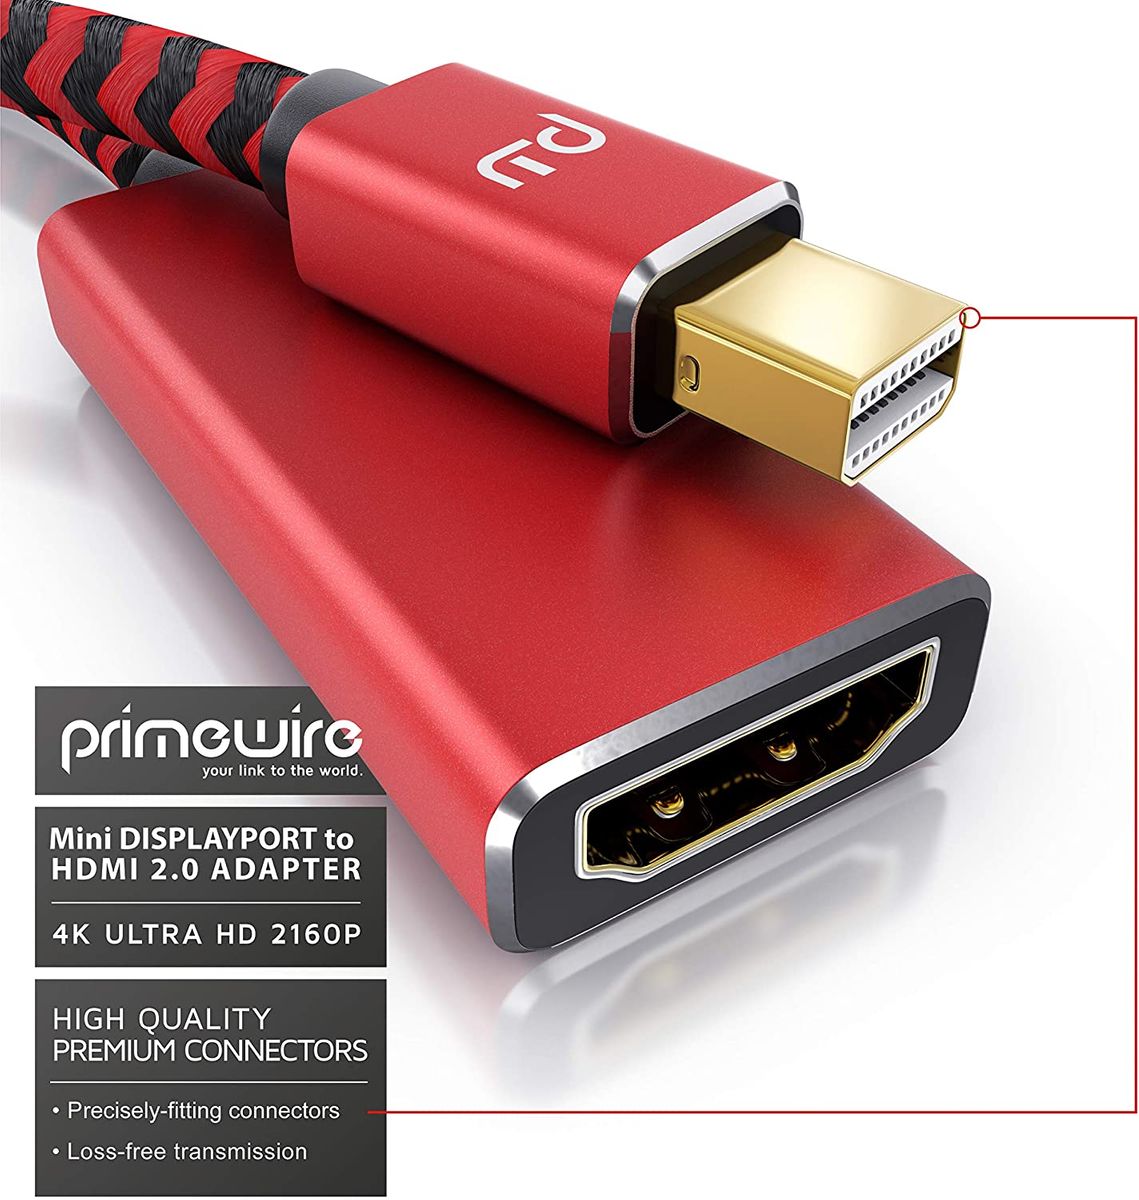 Primewire - Mini DP to HDMI 2.0 Adapter – mDP 4K – 3840 x 2160 @ 60 Hz - Thunderbolt 1 and 2 - gold-plated contacts – Audio and Video transmission – Connection from laptop to tv - red